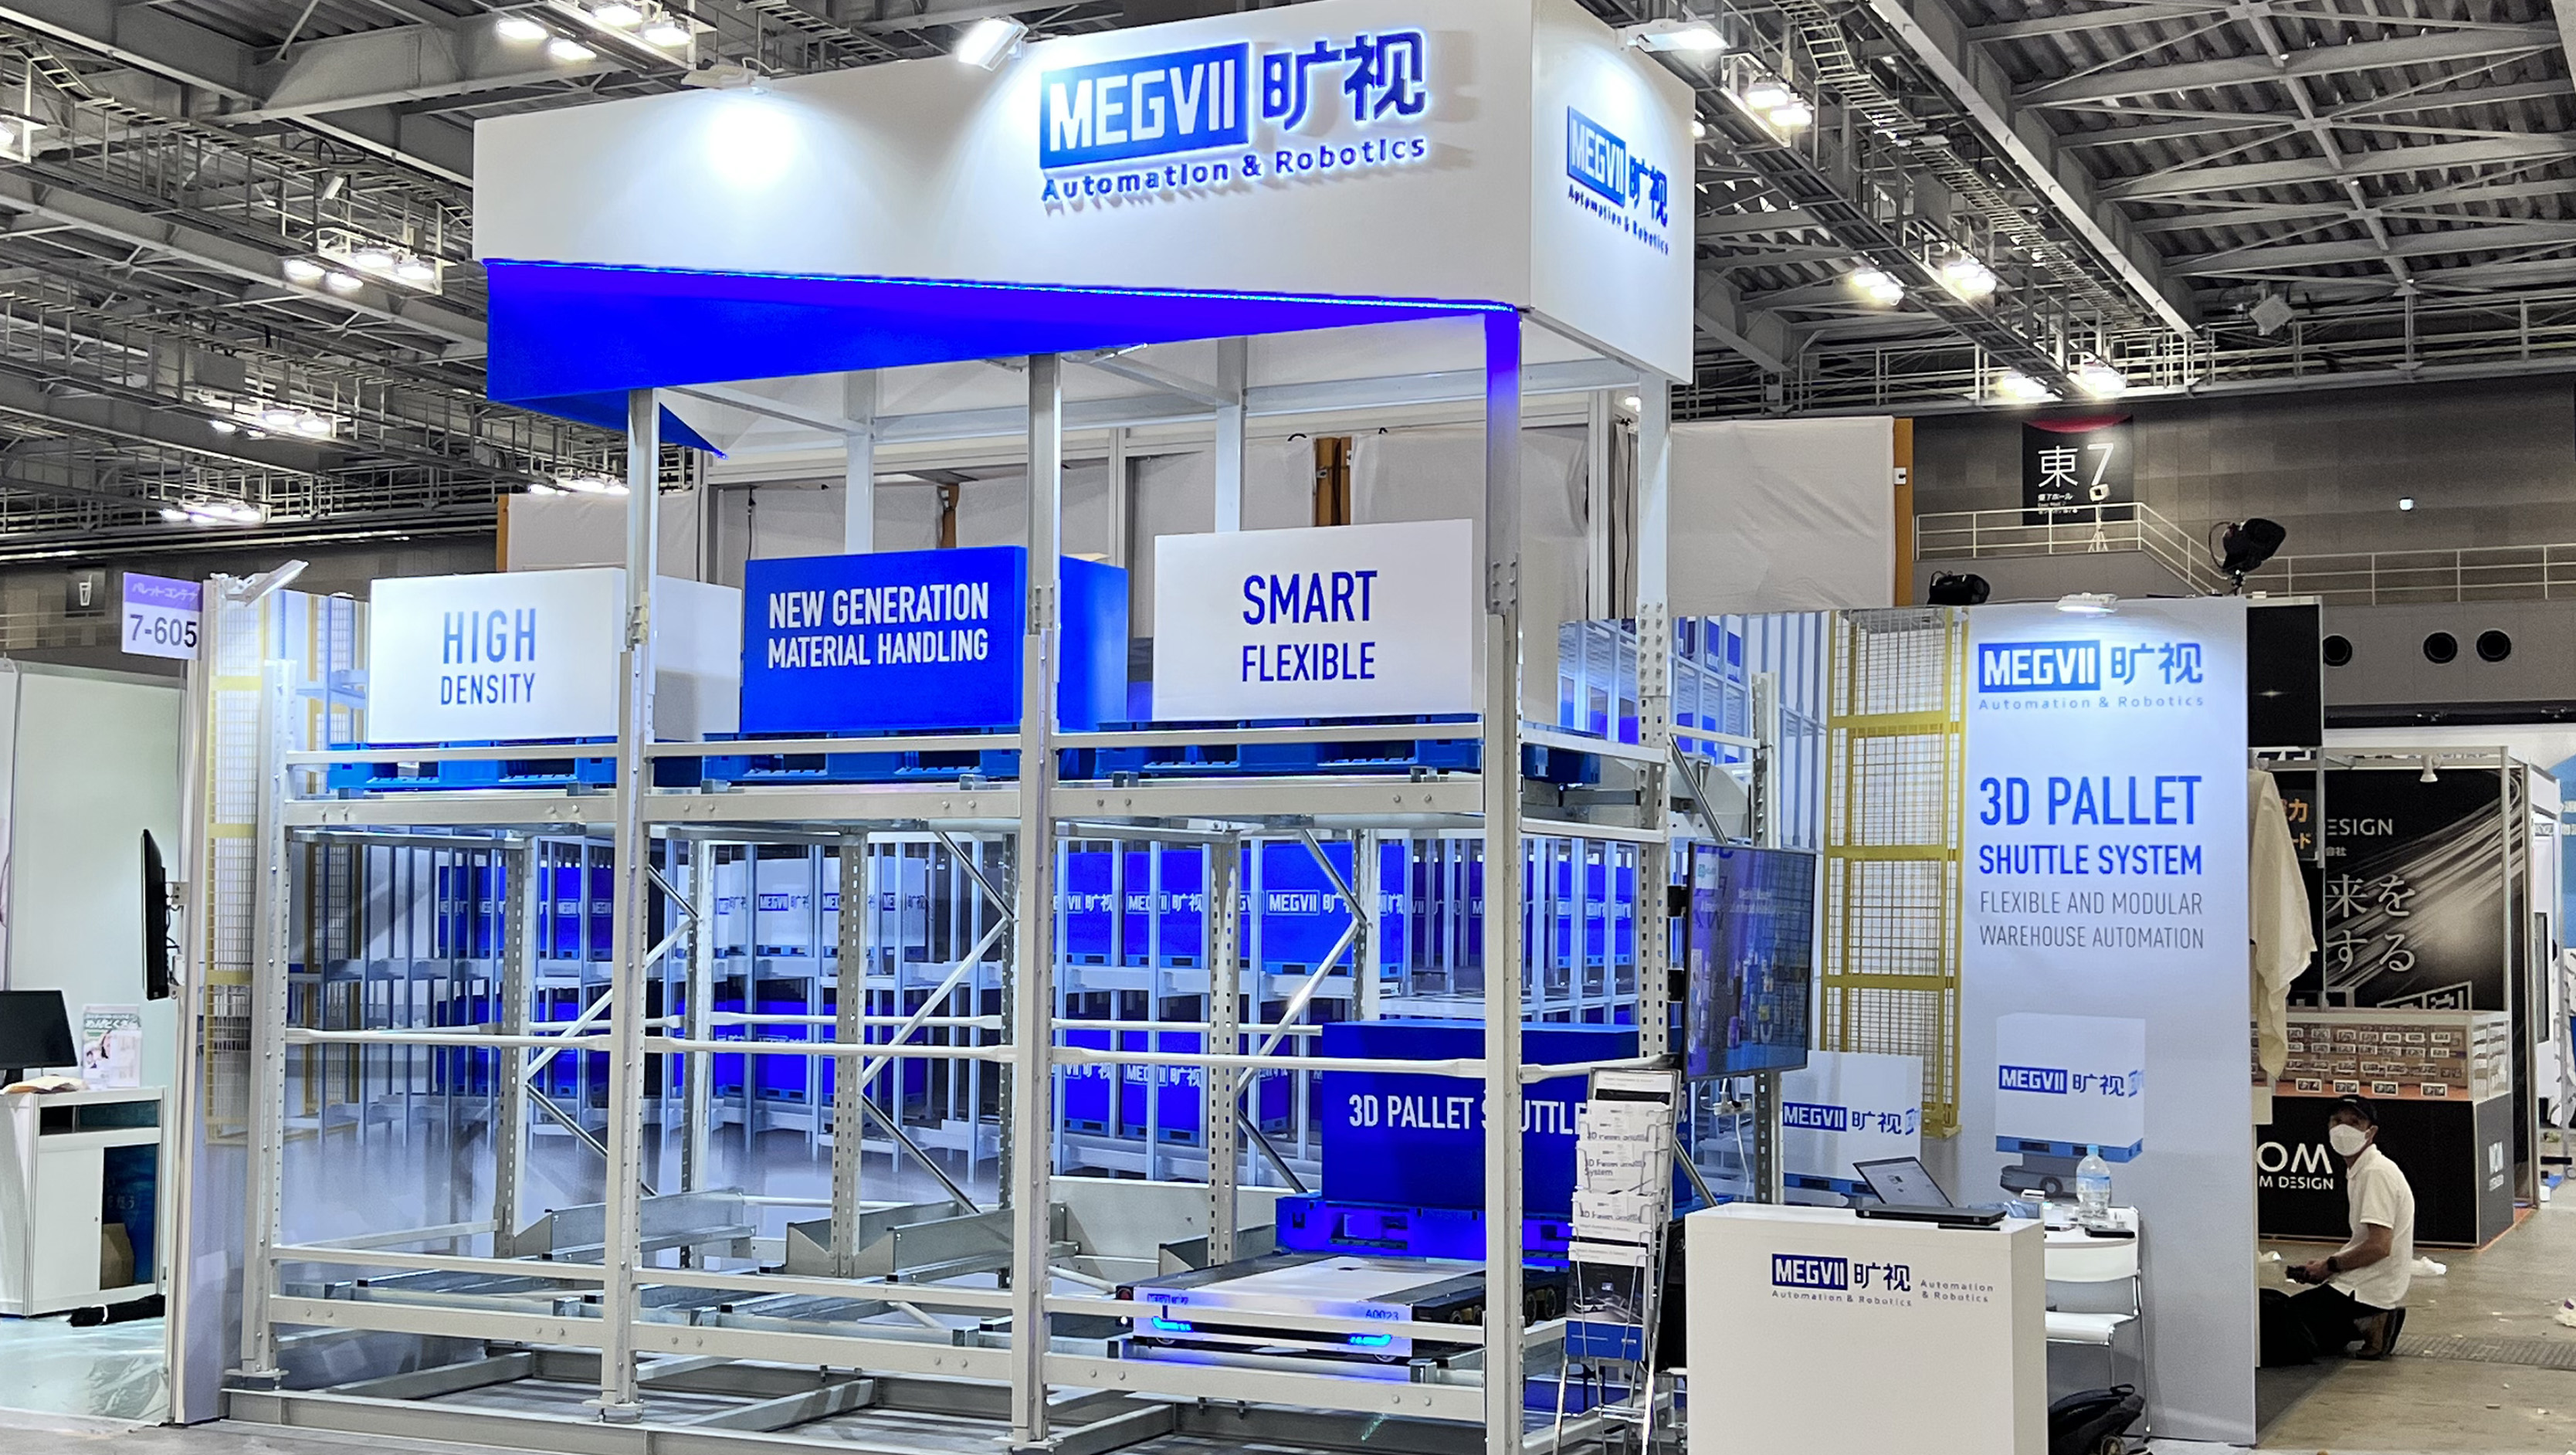 Megvii participated Japan LTT exhibition, the popularity of the 3D pallet shuttle+AMR